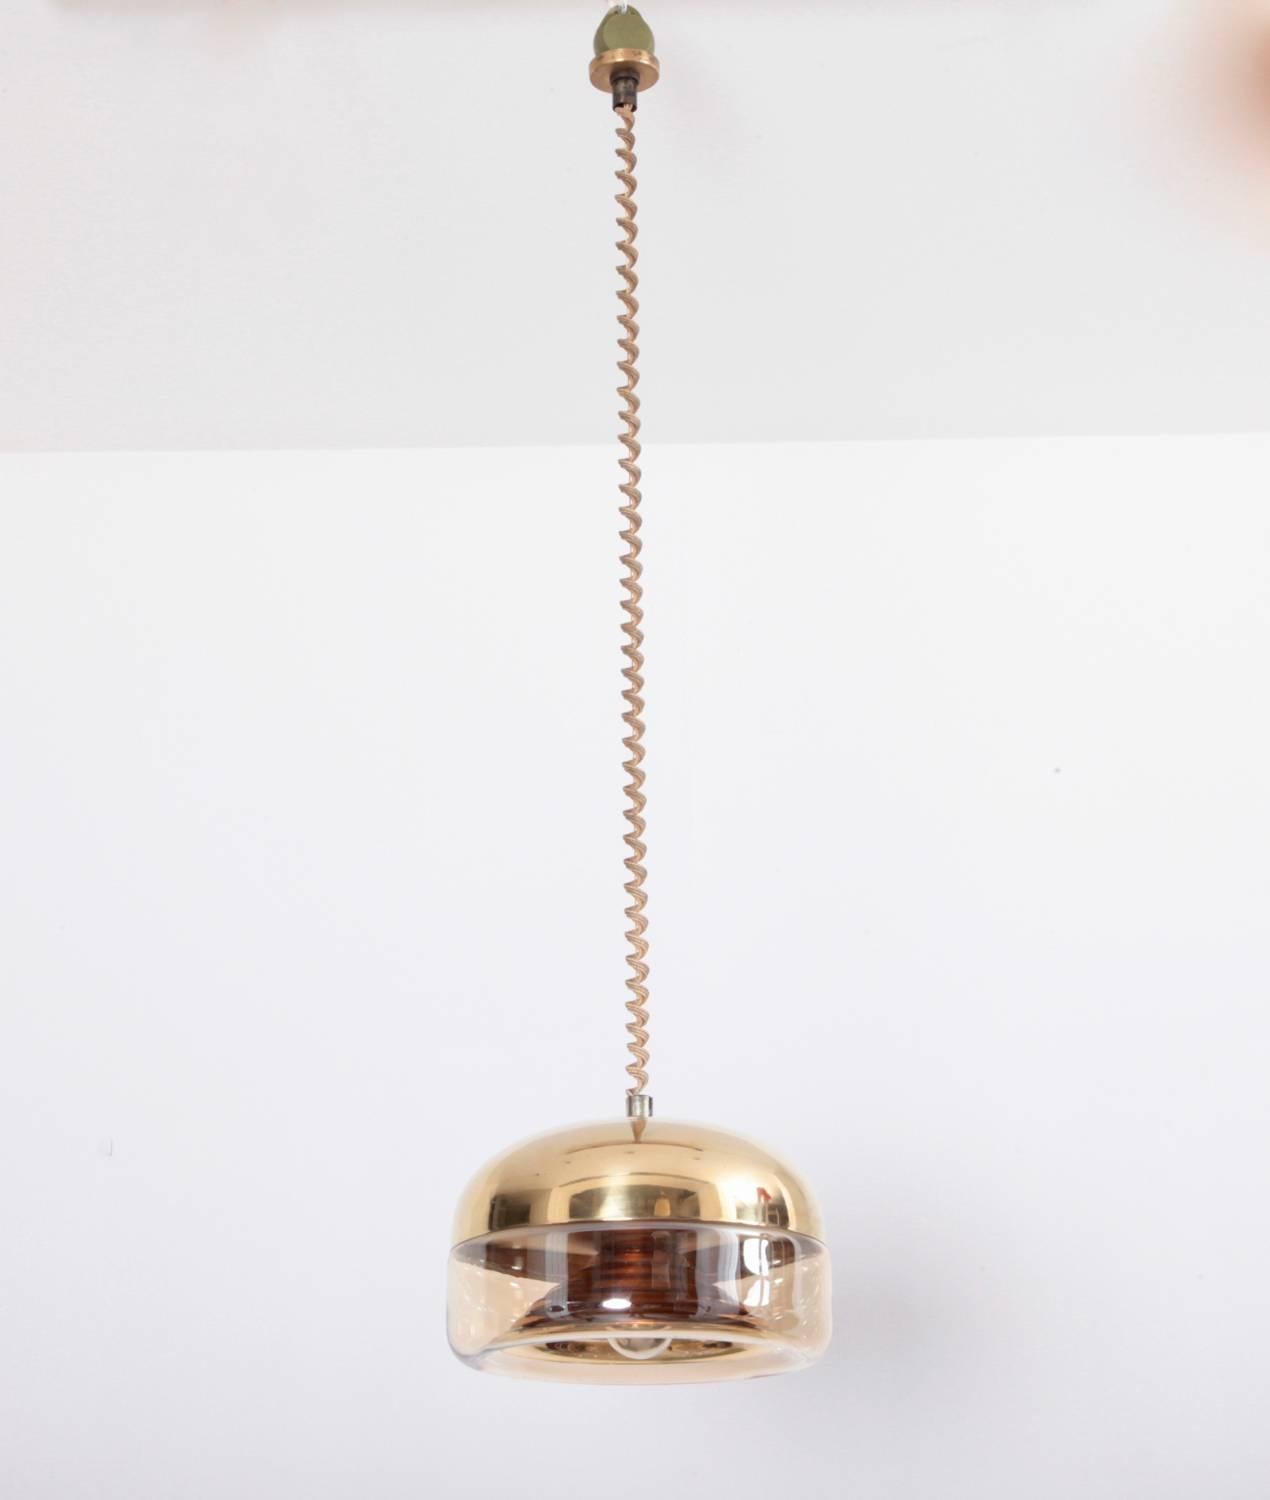 Beautiful Castiglioni style high quality brass and glass pendant with a height adjustable role system that is dated 1972. The glass has a gold plating and the top is solid brass.

Original cable and one x E27 / model a bulb.
To be on the safe side,